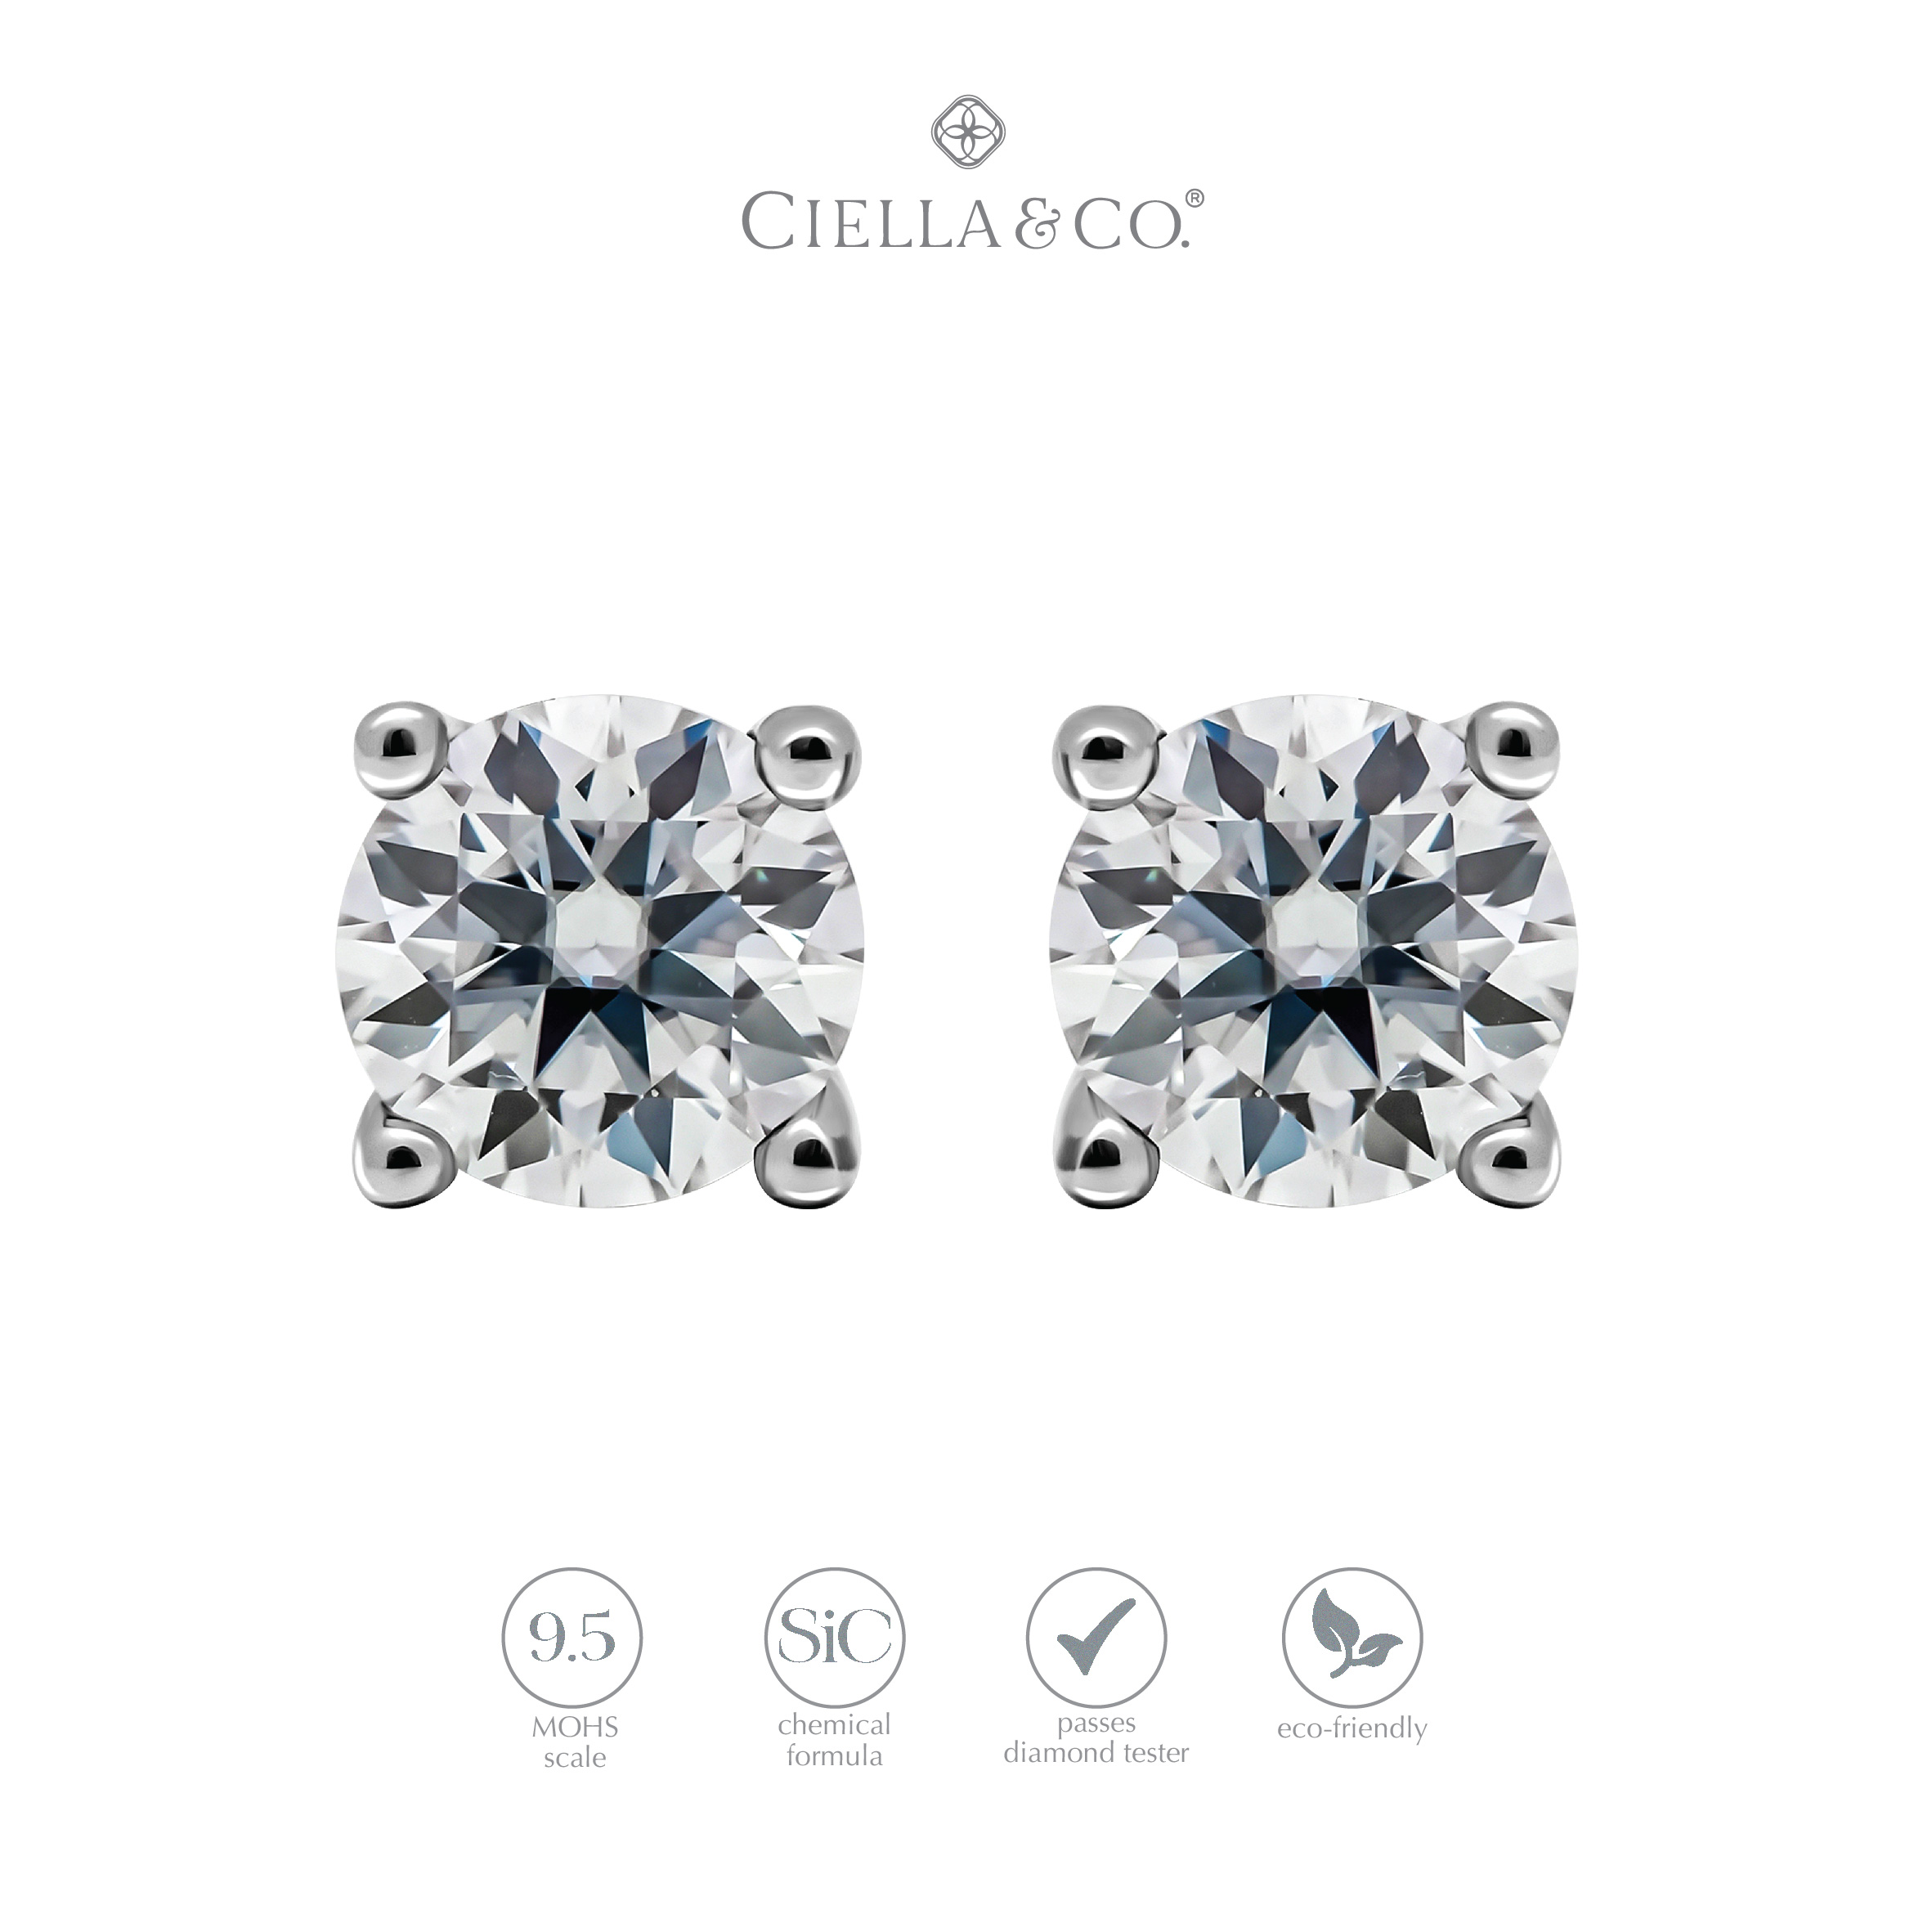 anting-moissanite-ciella-co-4-prong-round-cut-studs-earrings